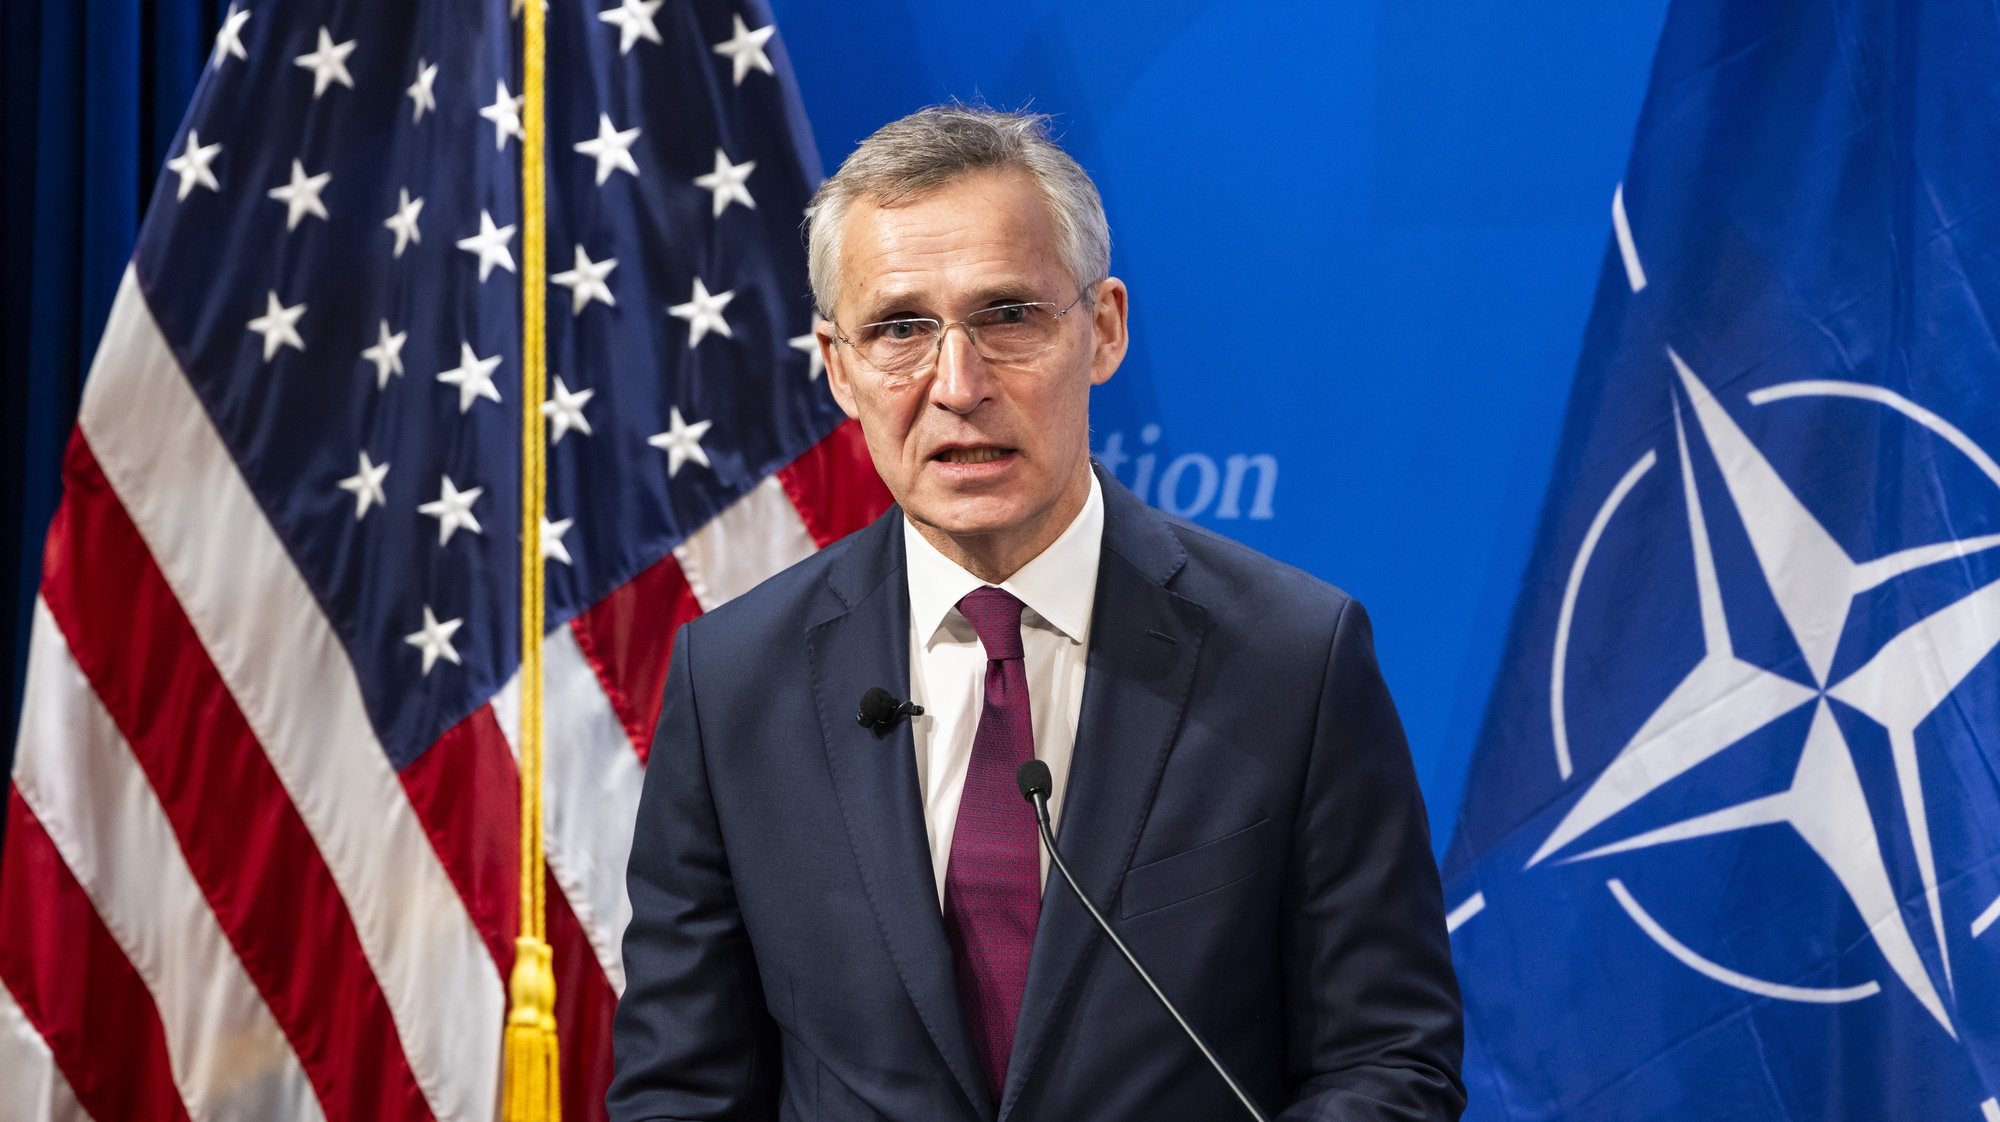 epa11116172 NATO Secretary General Jens Stoltenberg speaks on the modern needs of the NATO alliance at the Heritage Foundation in Washington, DC, USA, 31 January 2024. Stoltenberg stated that ‘while China is the most serious largest long-term challenge, Russia is the most immediate one.’ He also said ‘NATO is a good deal for the United States.’  EPA/JIM LO SCALZO